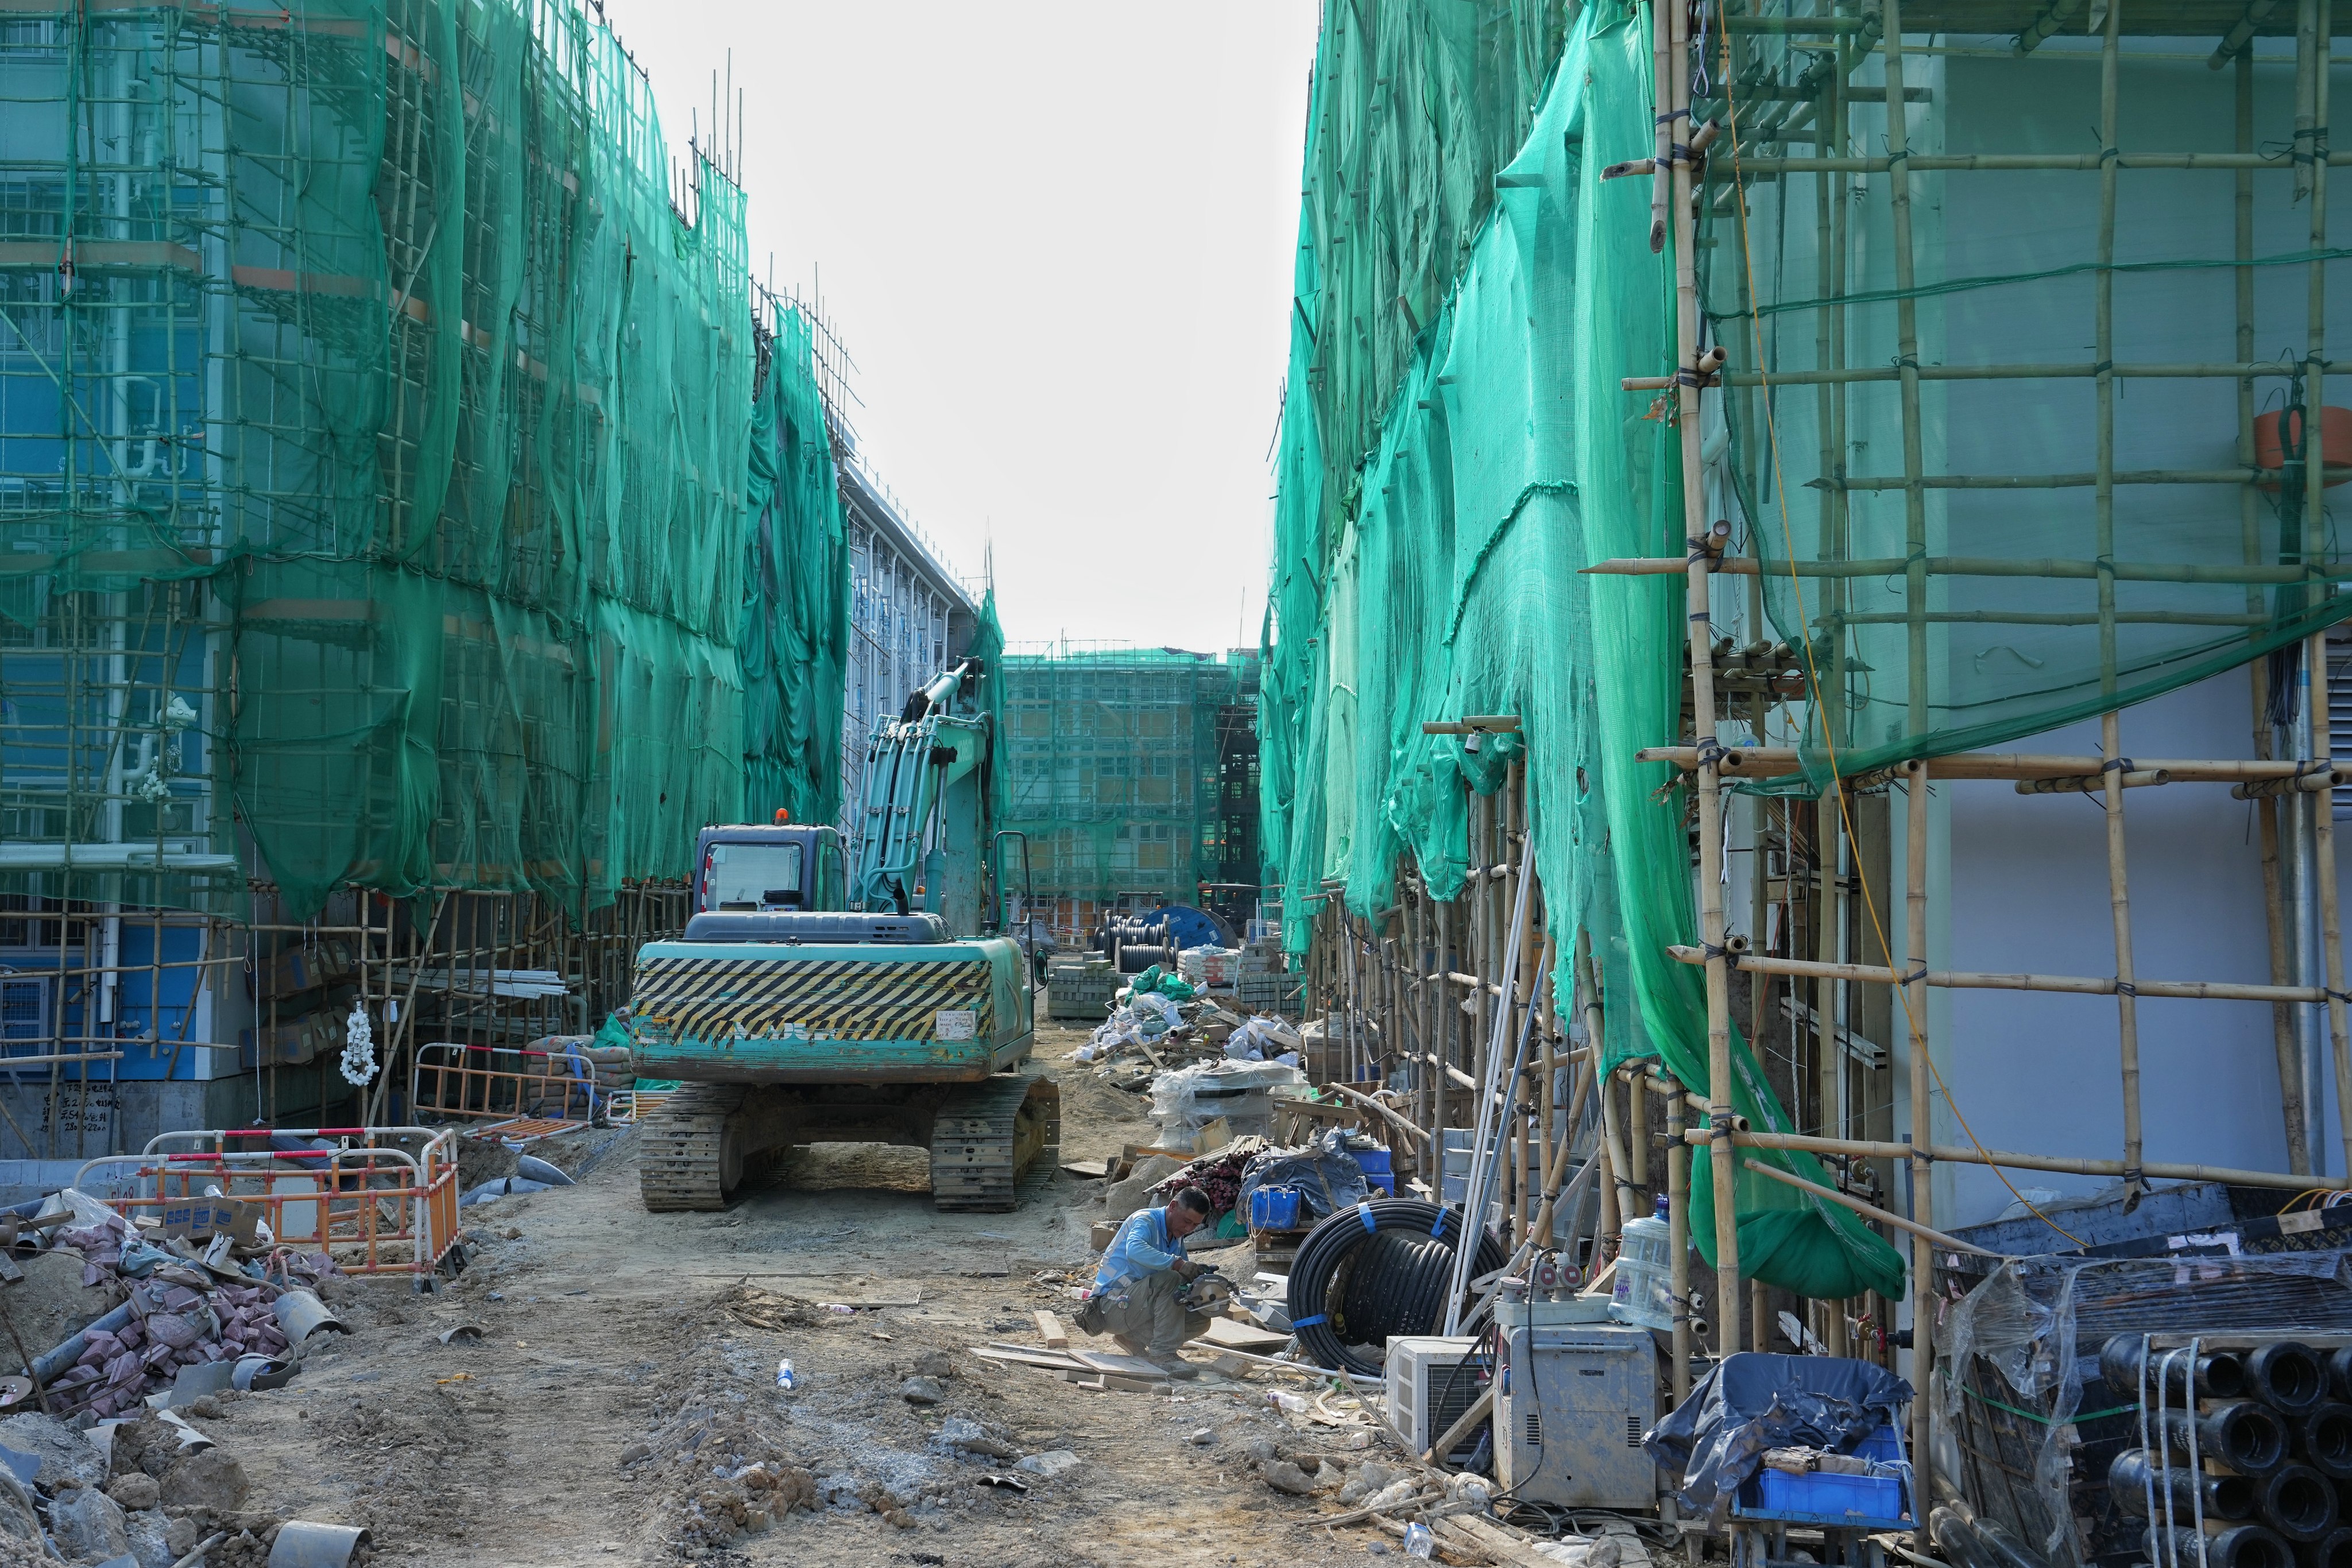 The 1,028 transitional units in Kam Tin are scheduled to be complete in the final quarter of this year. Photo: Elson Li